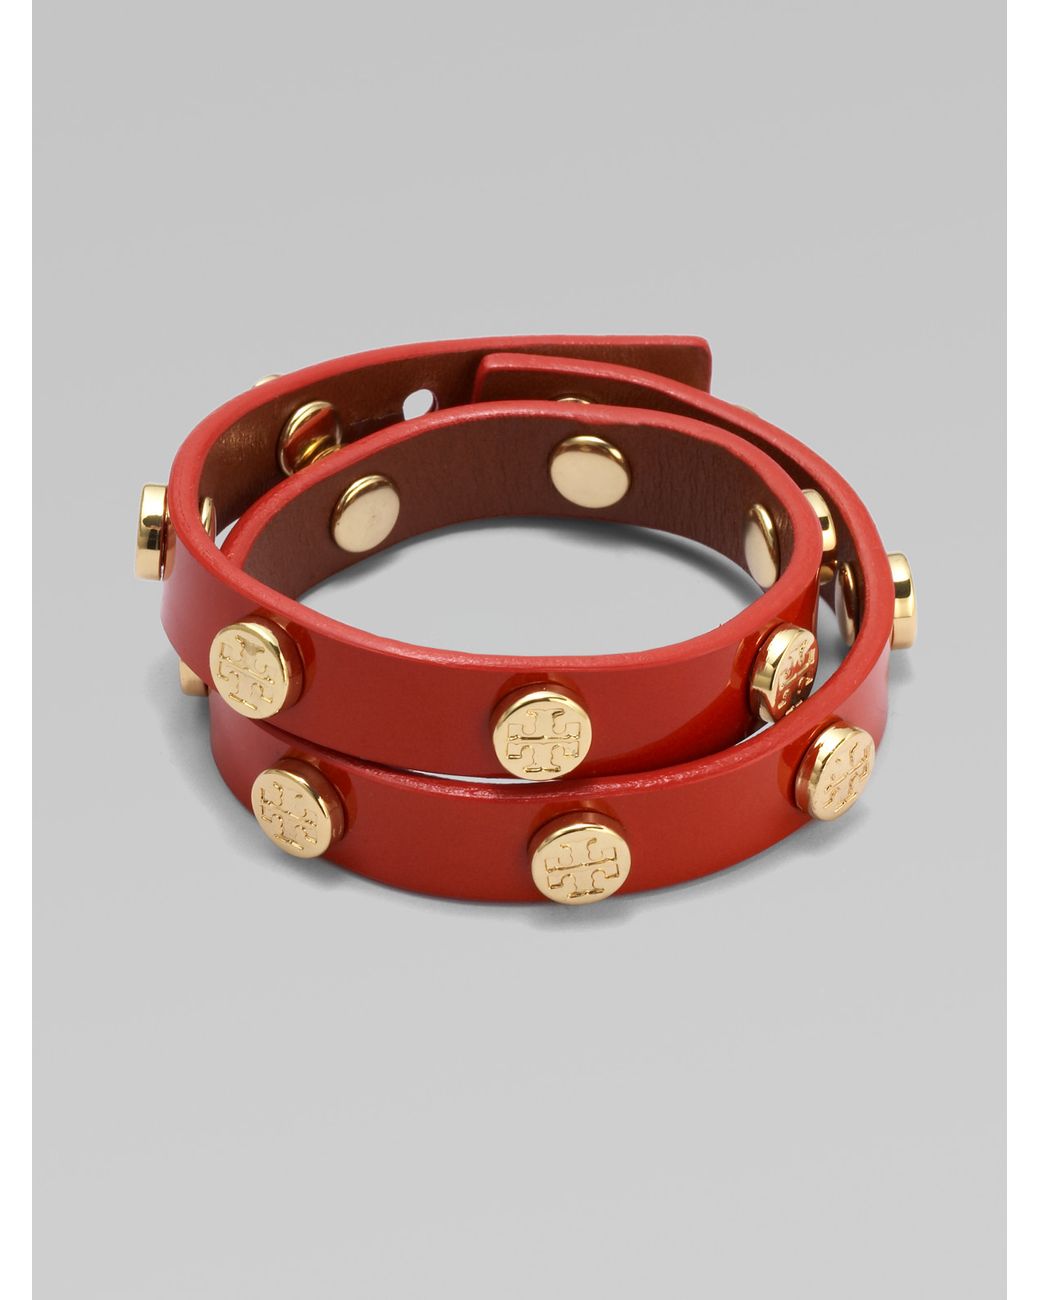 Tory Burch Patent Leather Wrap Bracelet in Red | Lyst